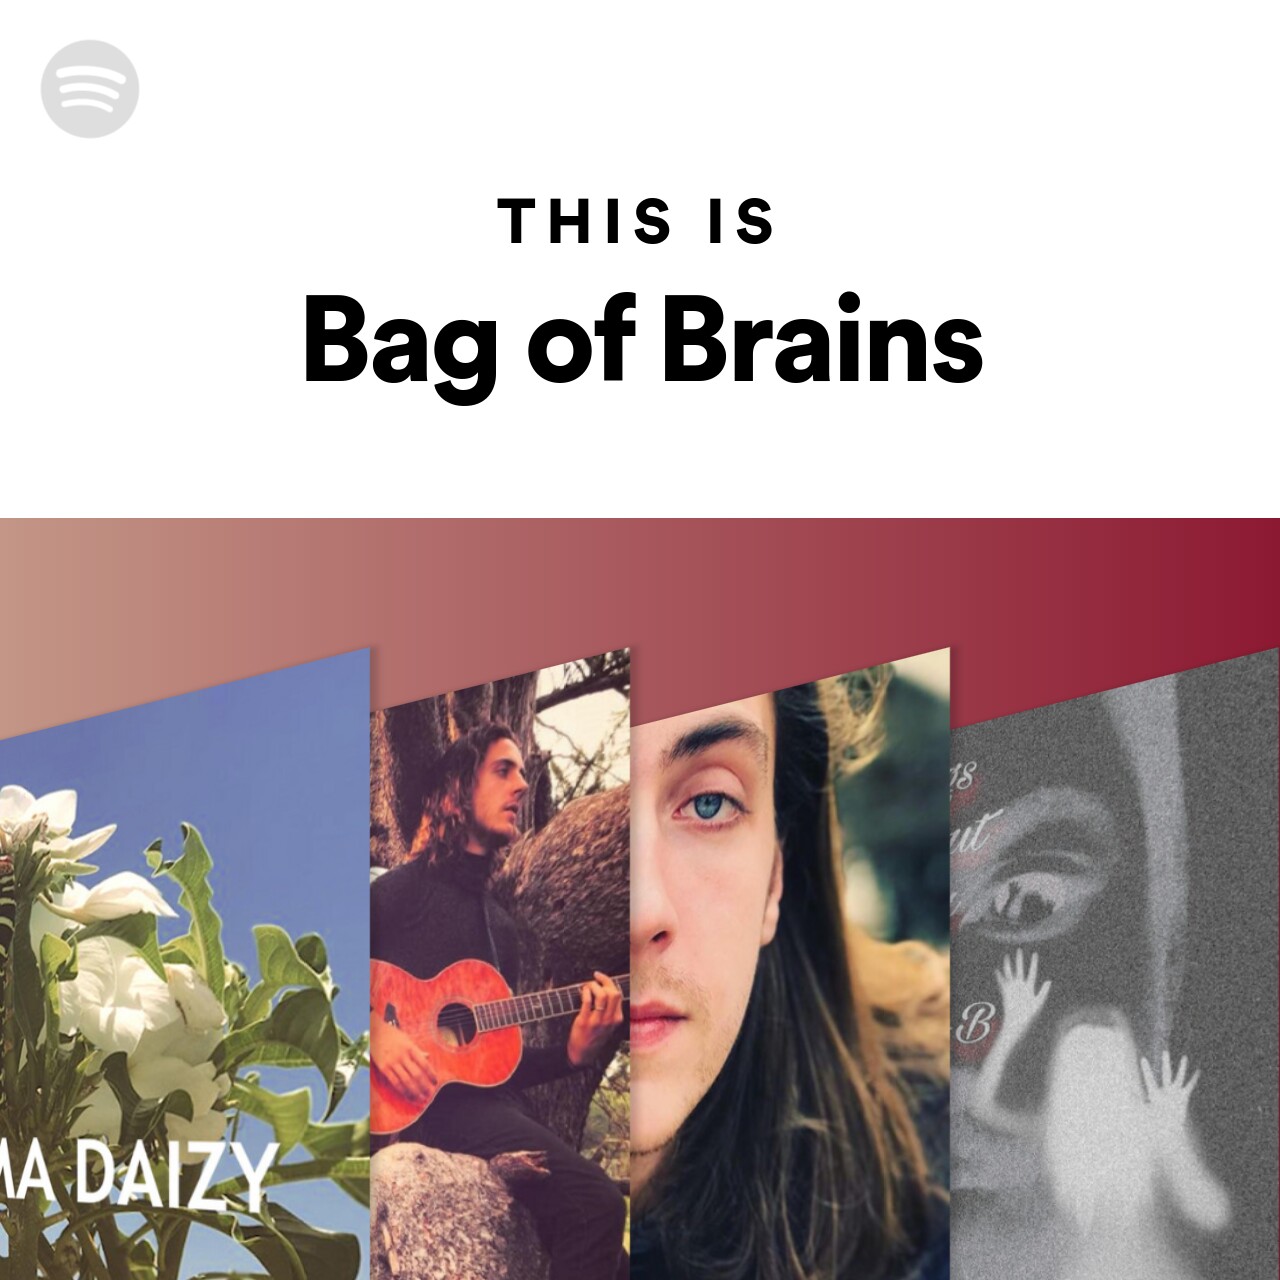 This Is Bag of Brains